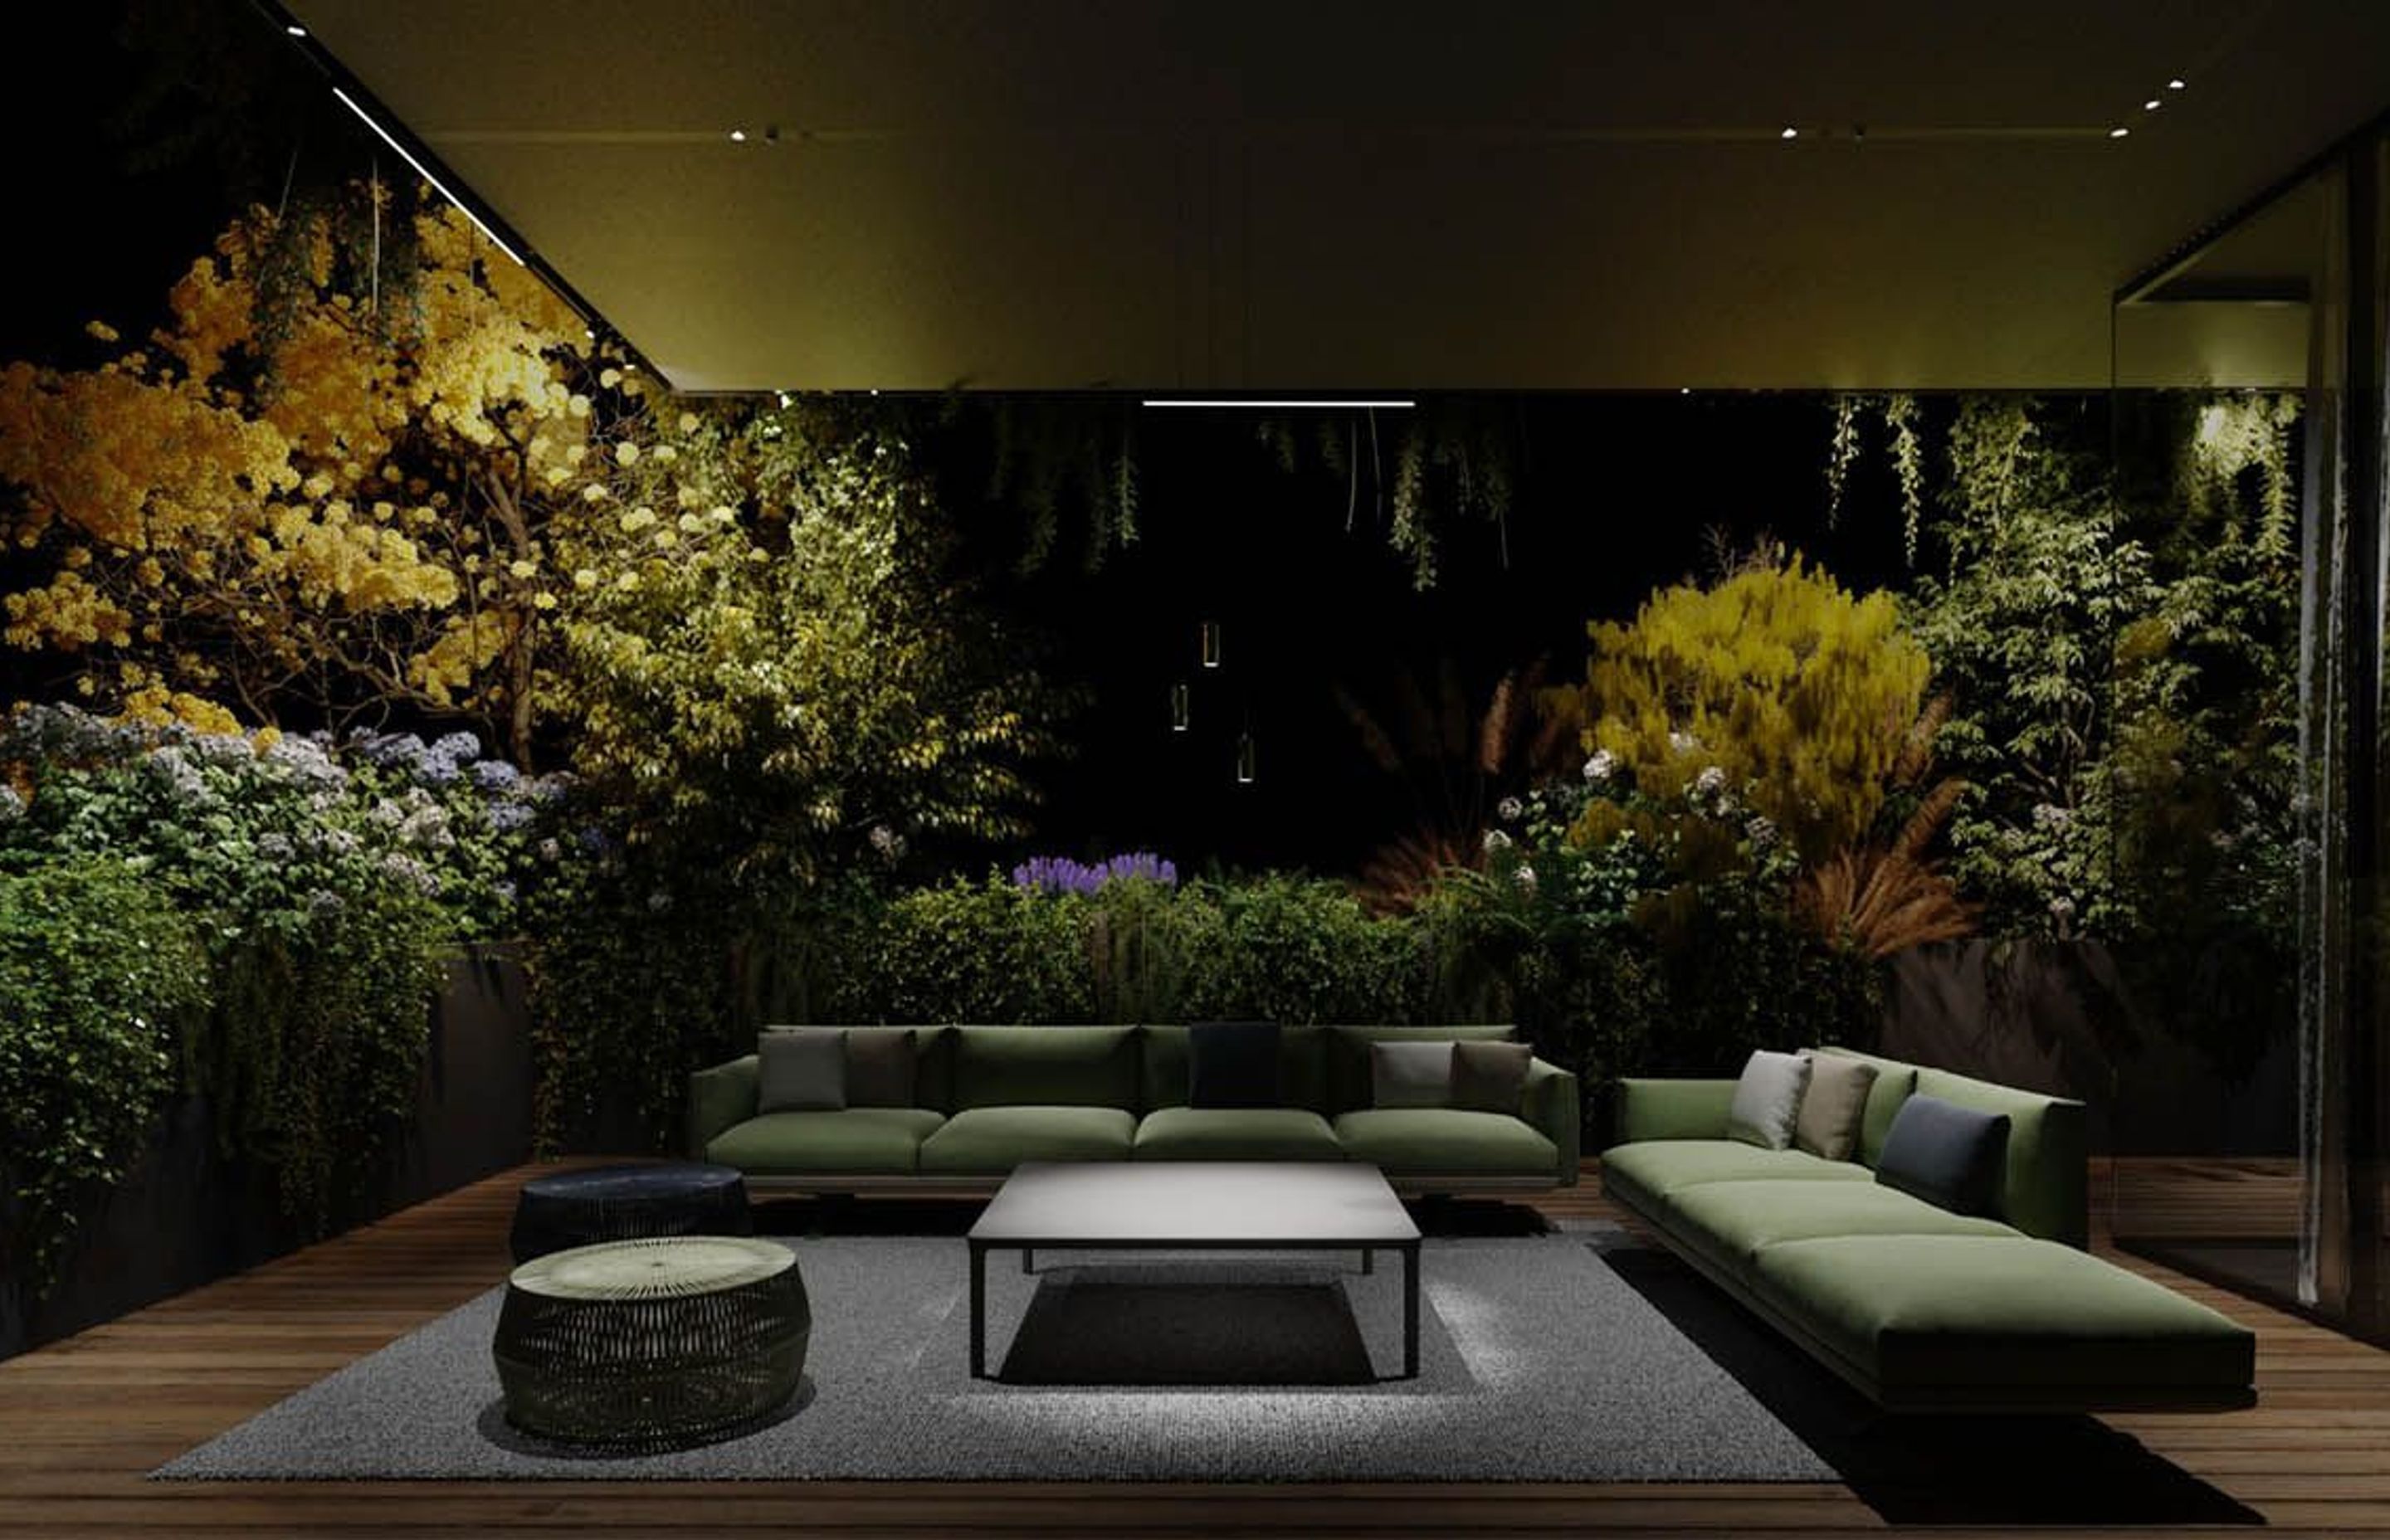 The main goal of the IVY system is to blur the line between indoor and outdoor living.